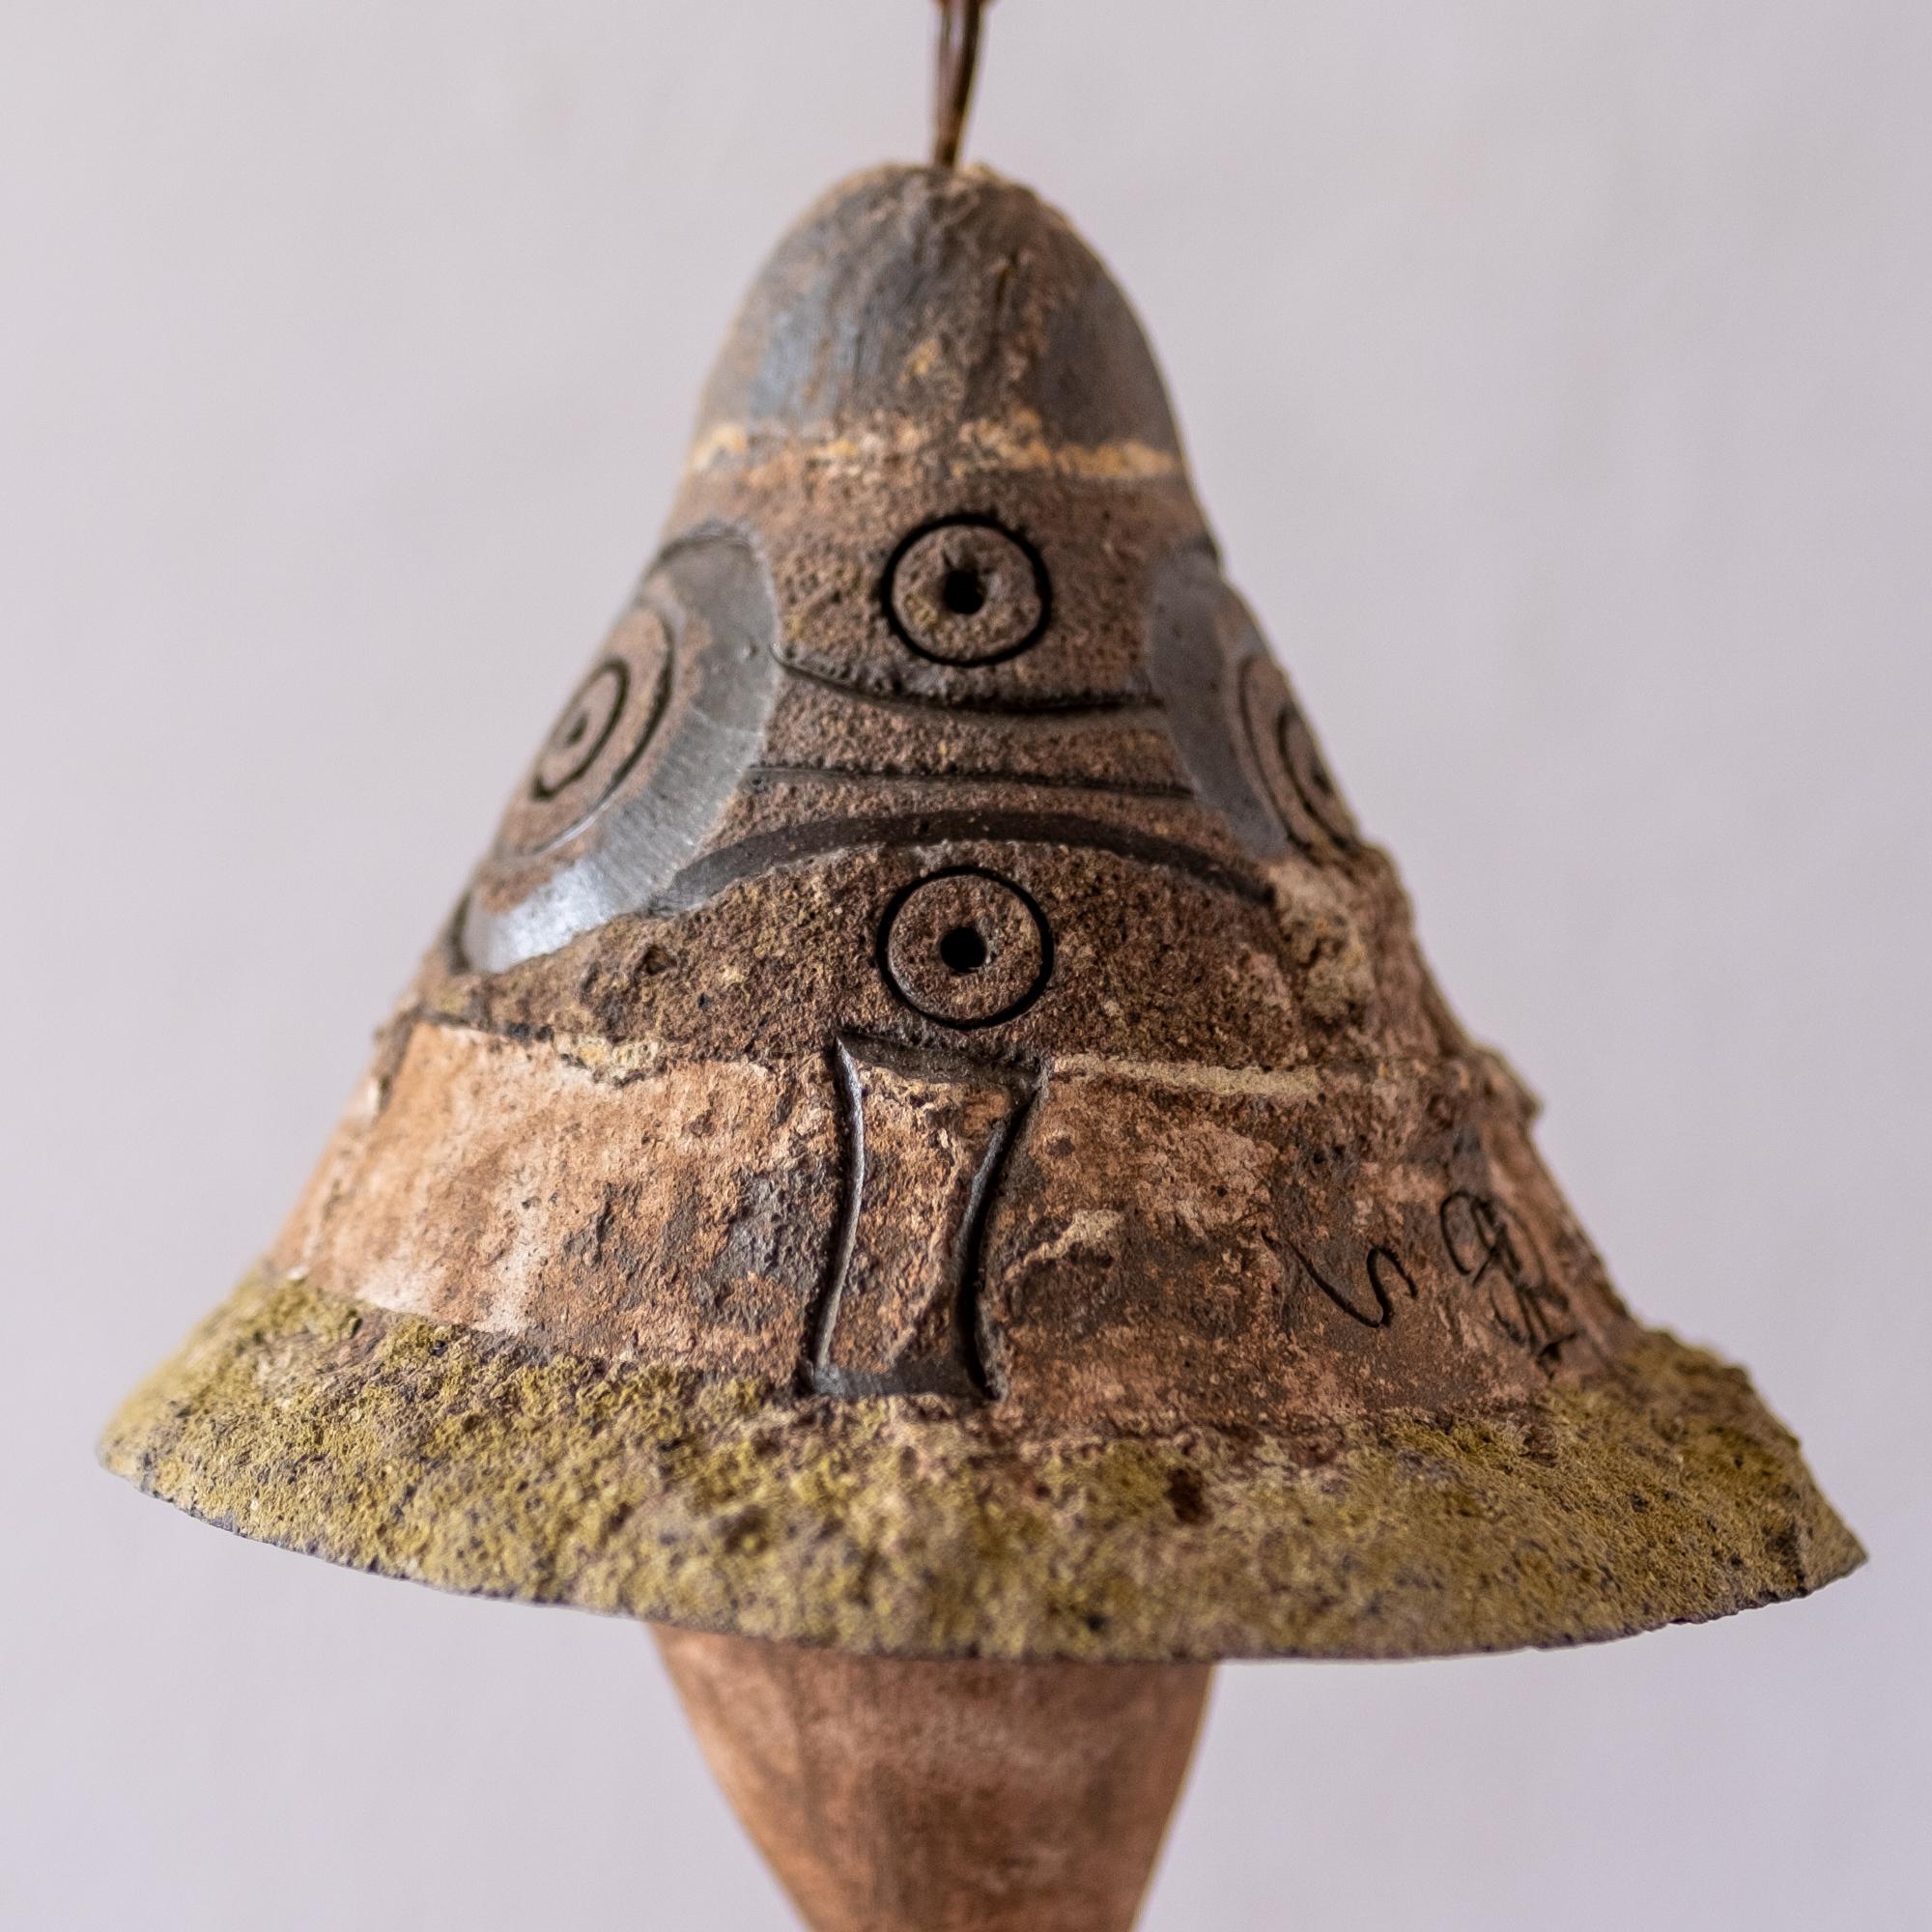 Early and special ceramic bell by Paolo Soleri. Many craftspeople helped with producing work at Cosanti, however this work is signed with an 